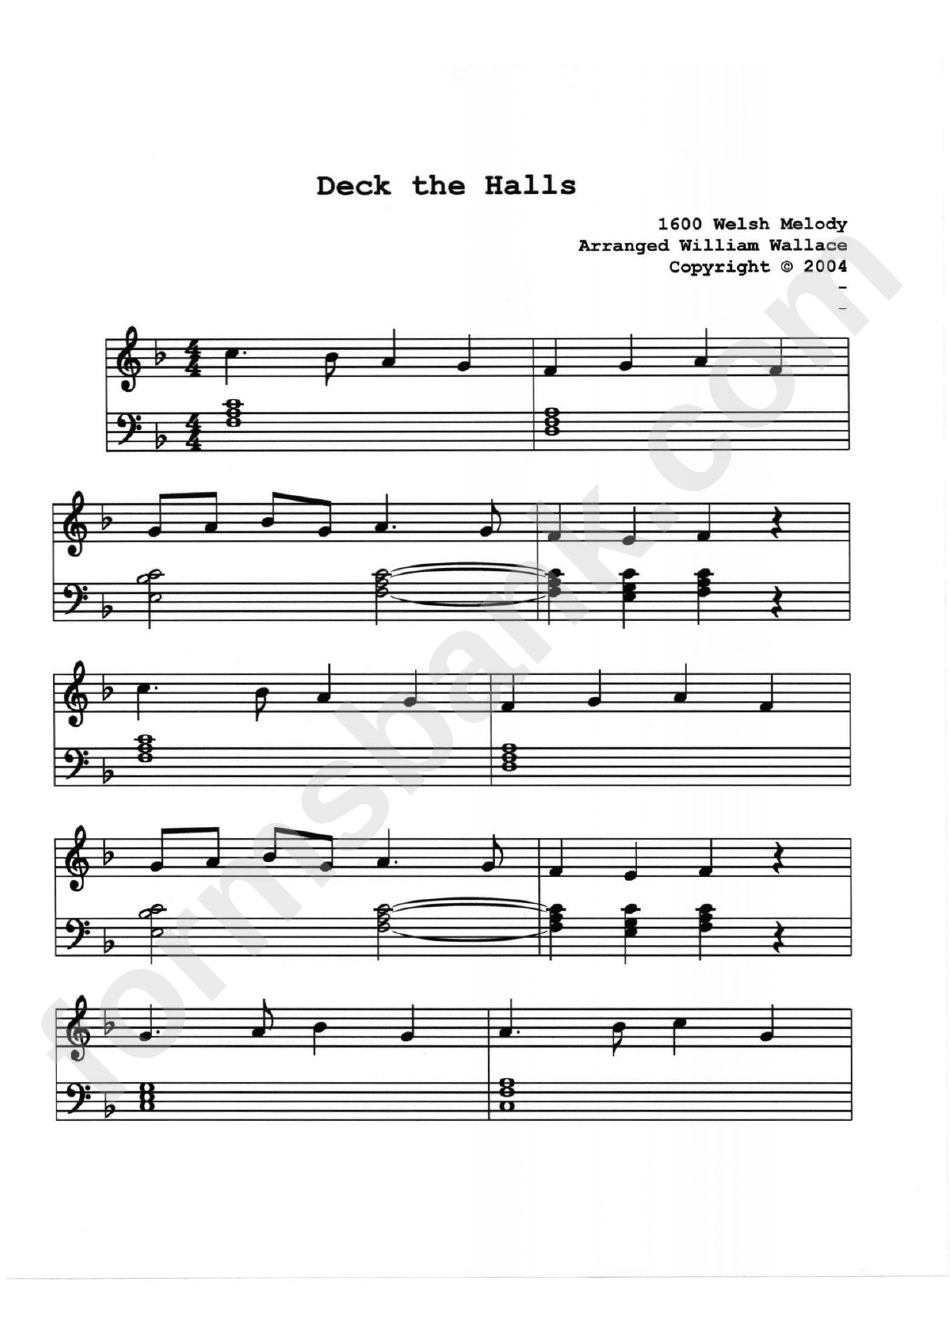 Deck The Halls (William Wallace) Piano Sheet Music